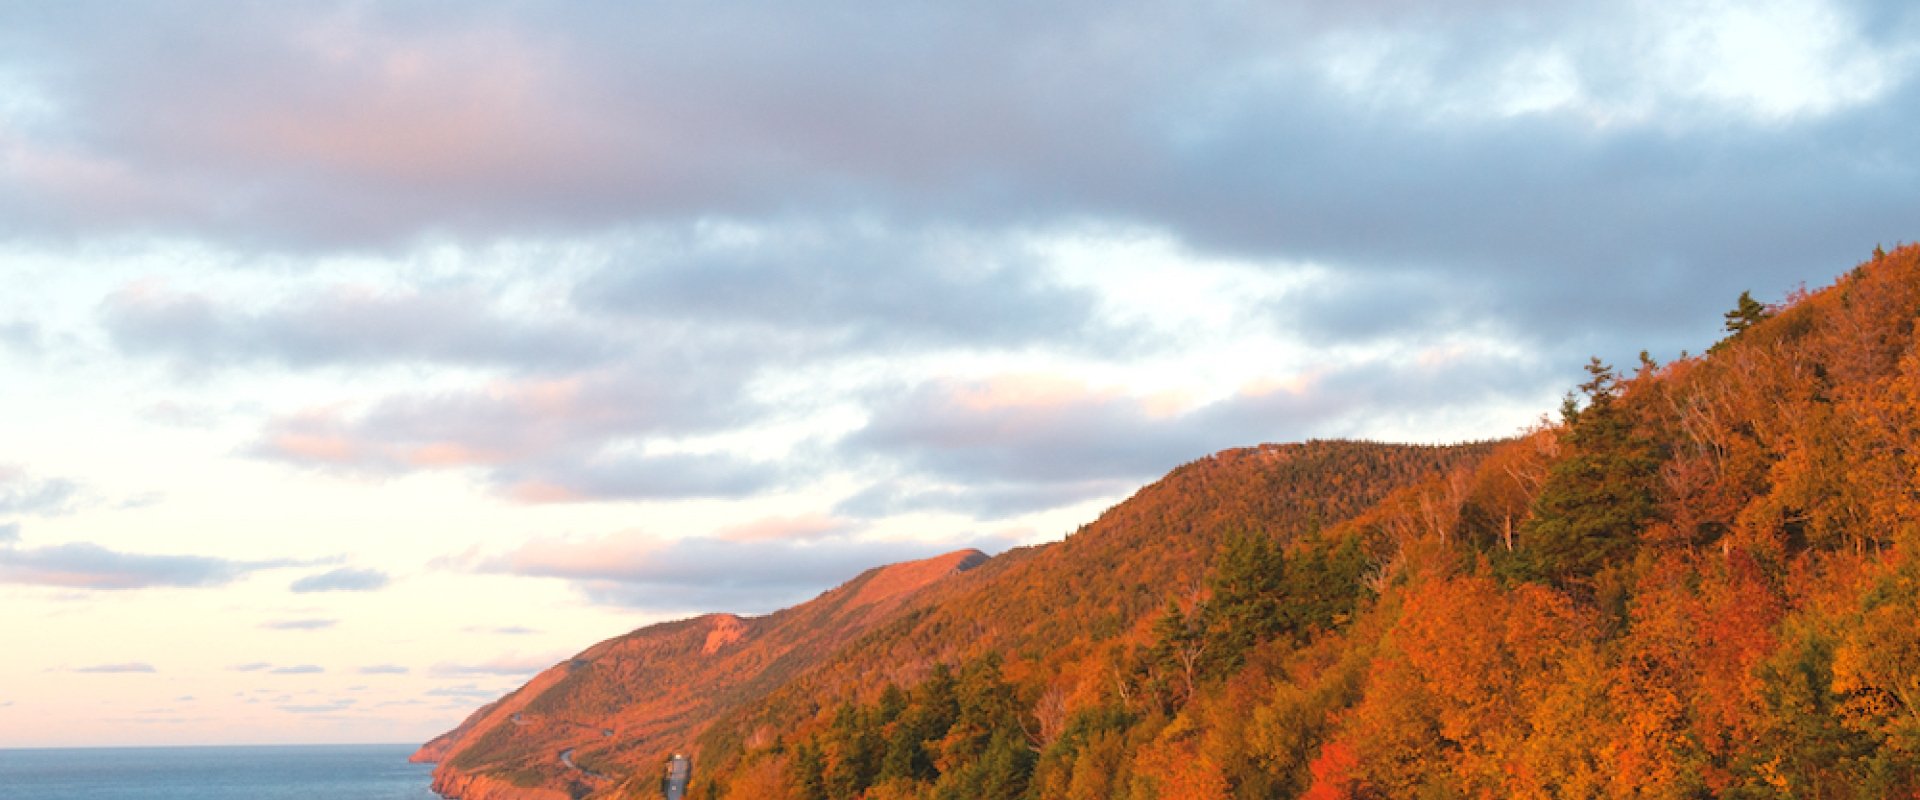 The winding road of the Cabot Trail, at the base of the red-tree lined mountains in fall